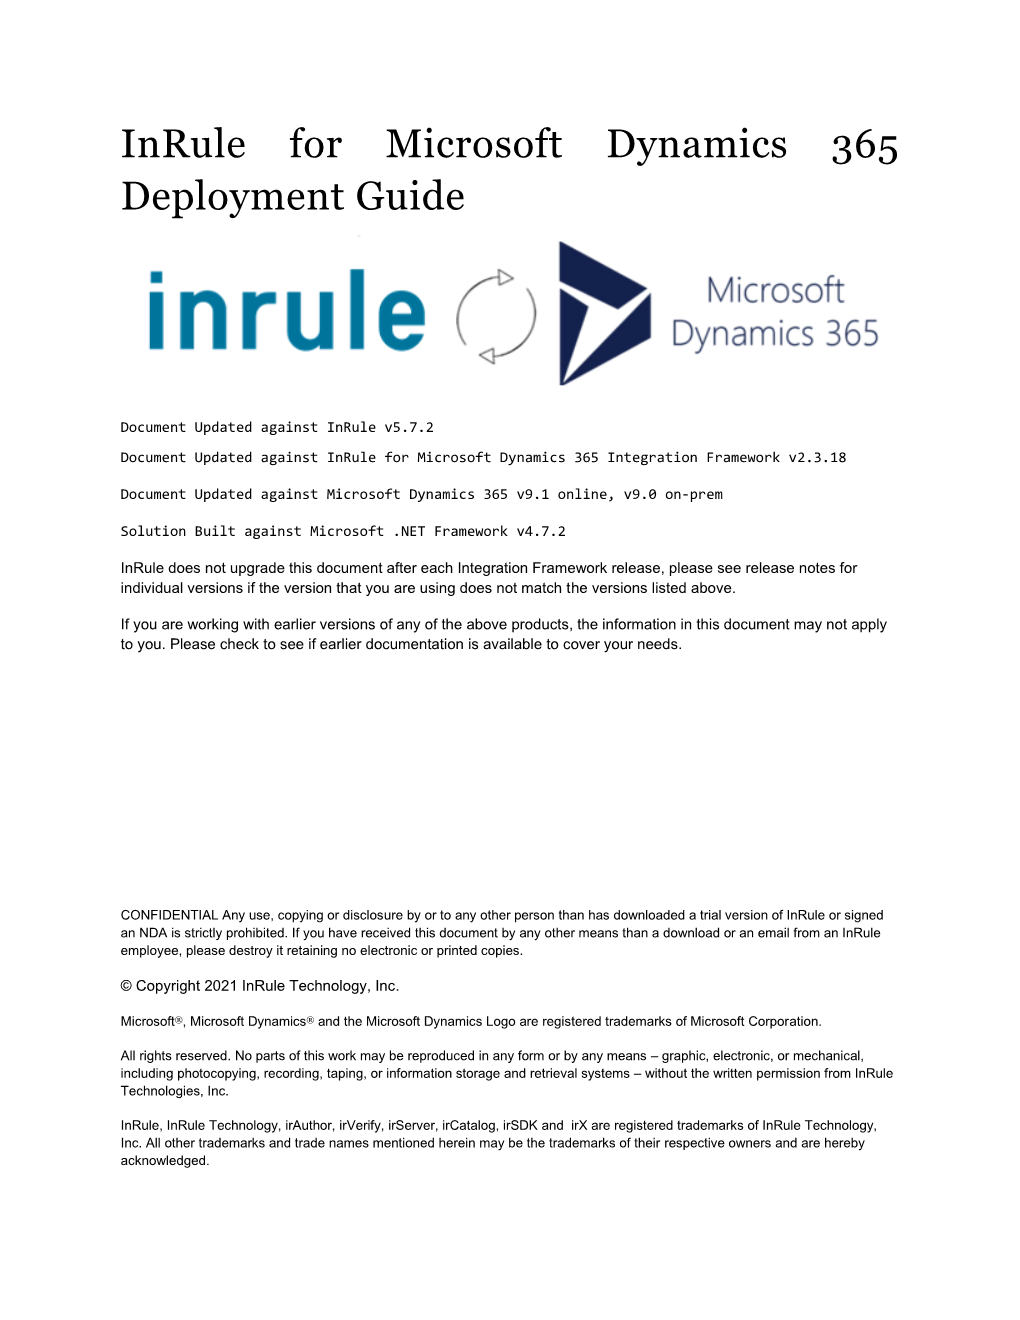 Inrule for Microsoft Dynamics 365 Deployment Guide